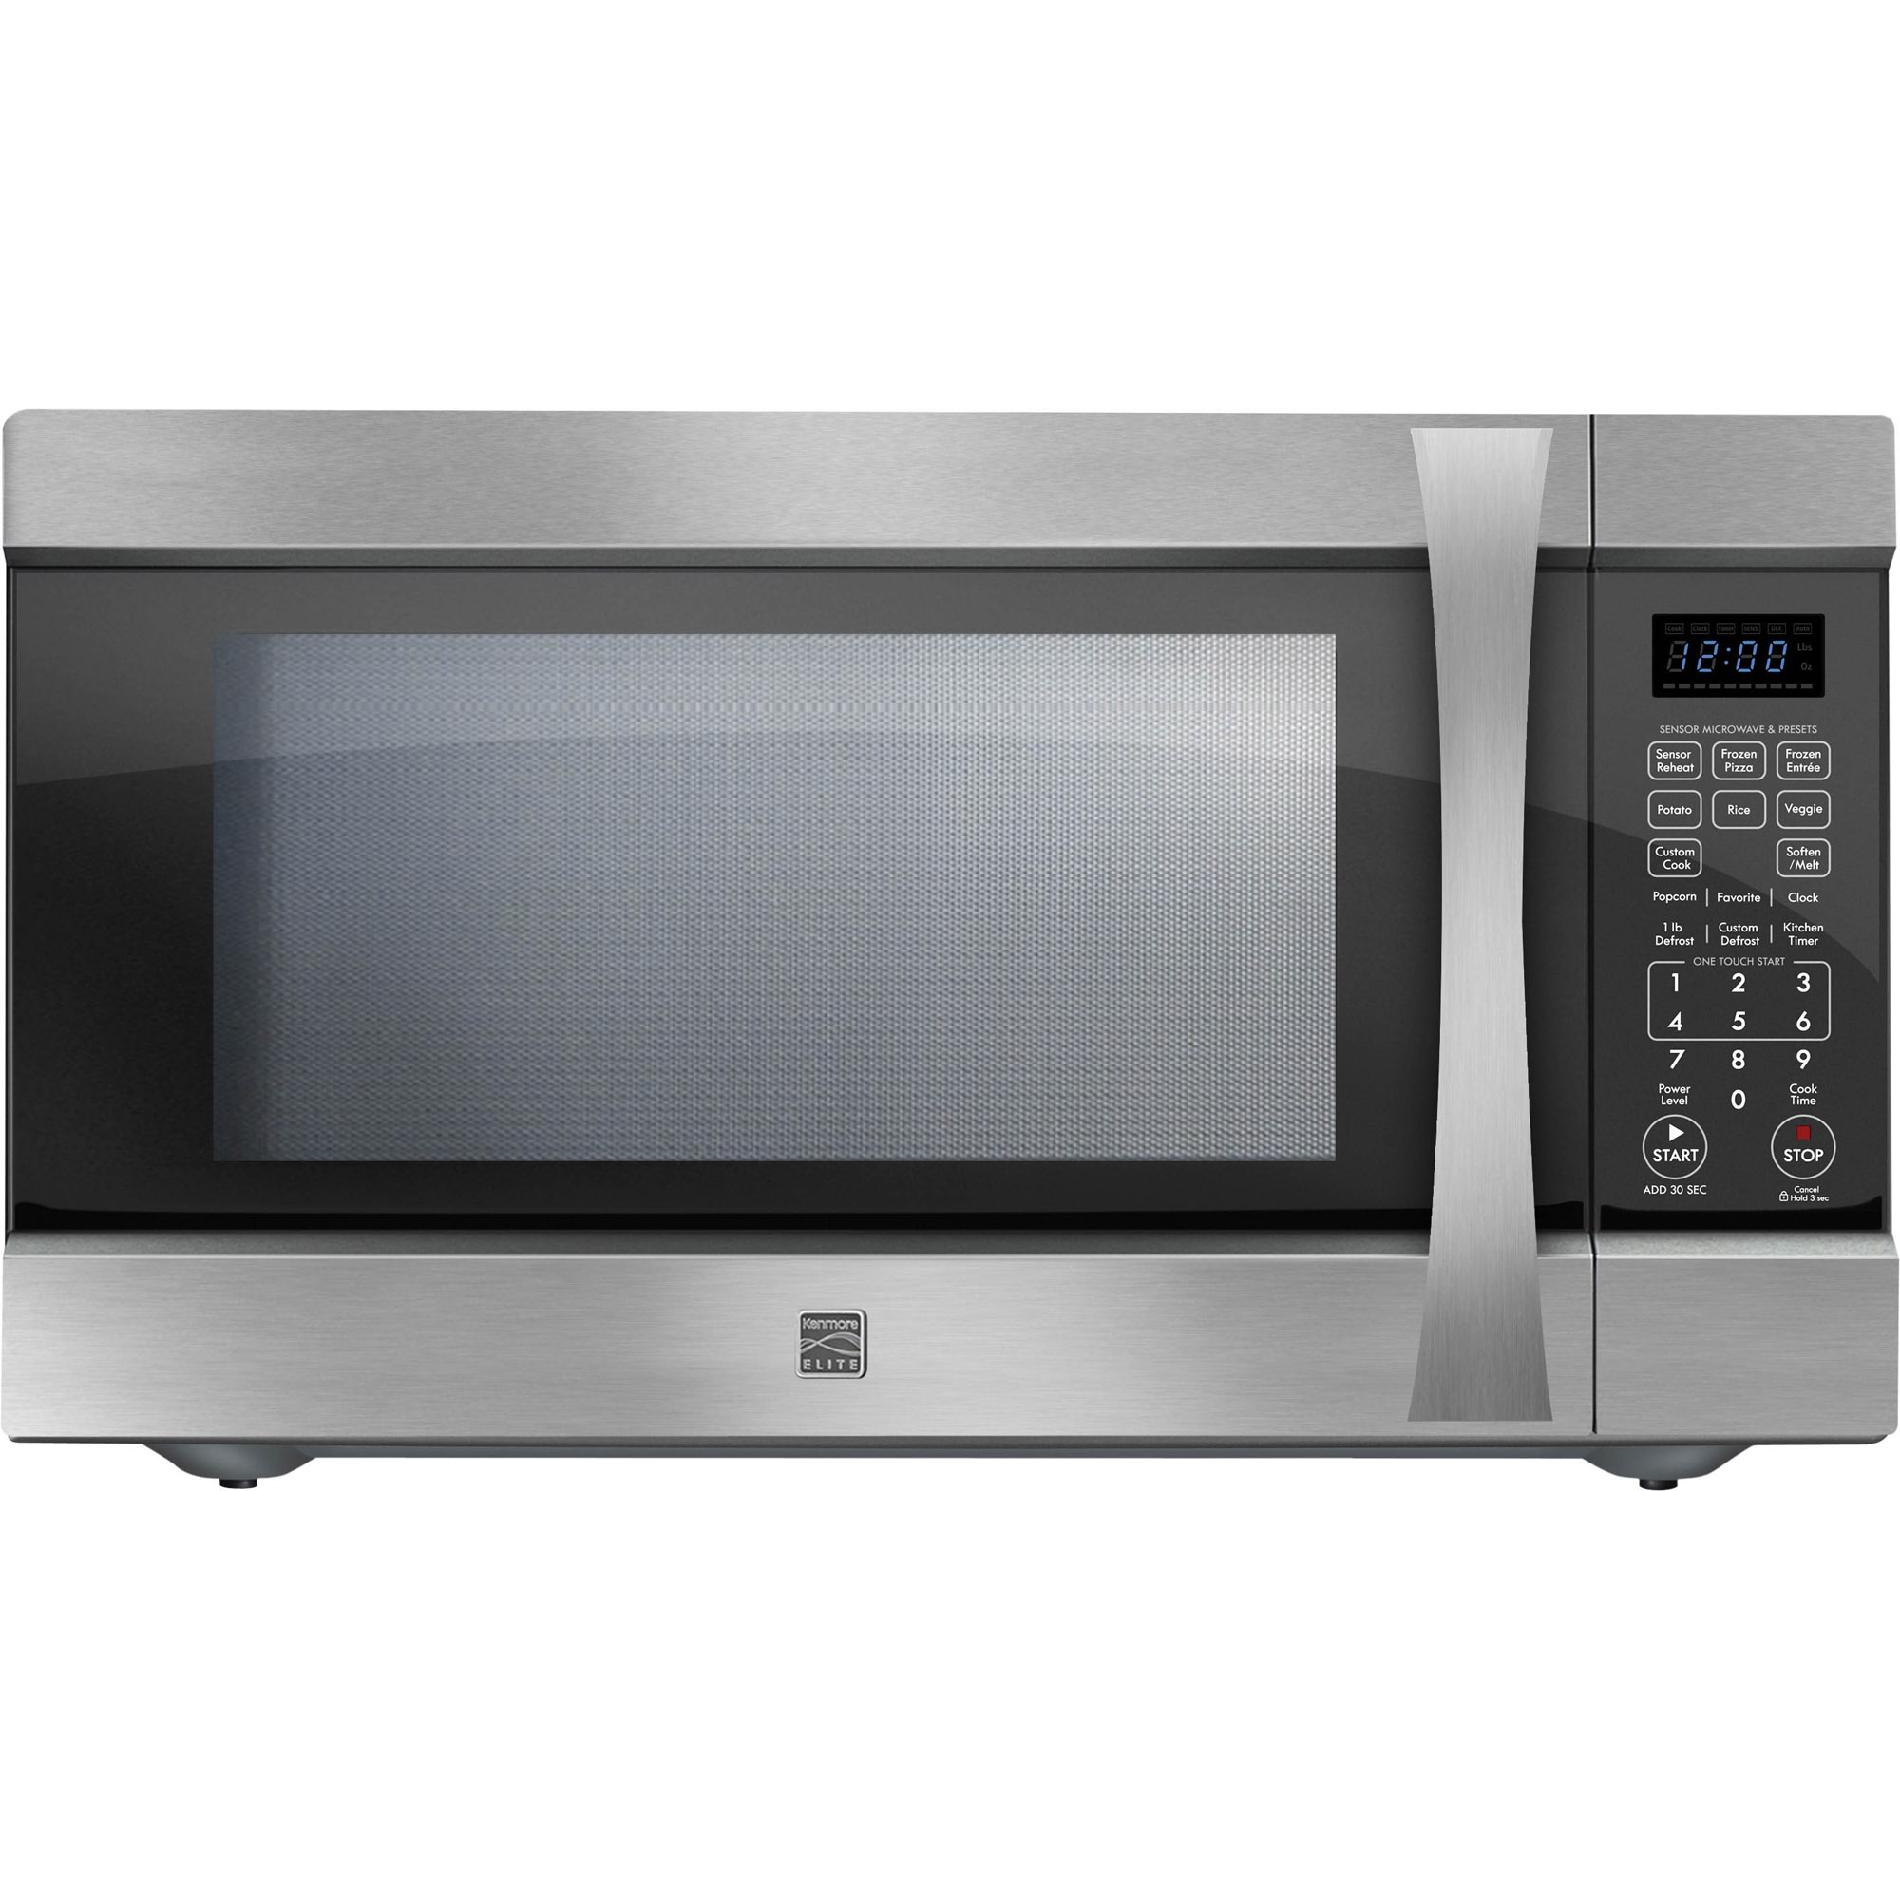 Kenmore Elite 75223 2.2 cu. ft. Countertop Microwave w/ Extra-Large